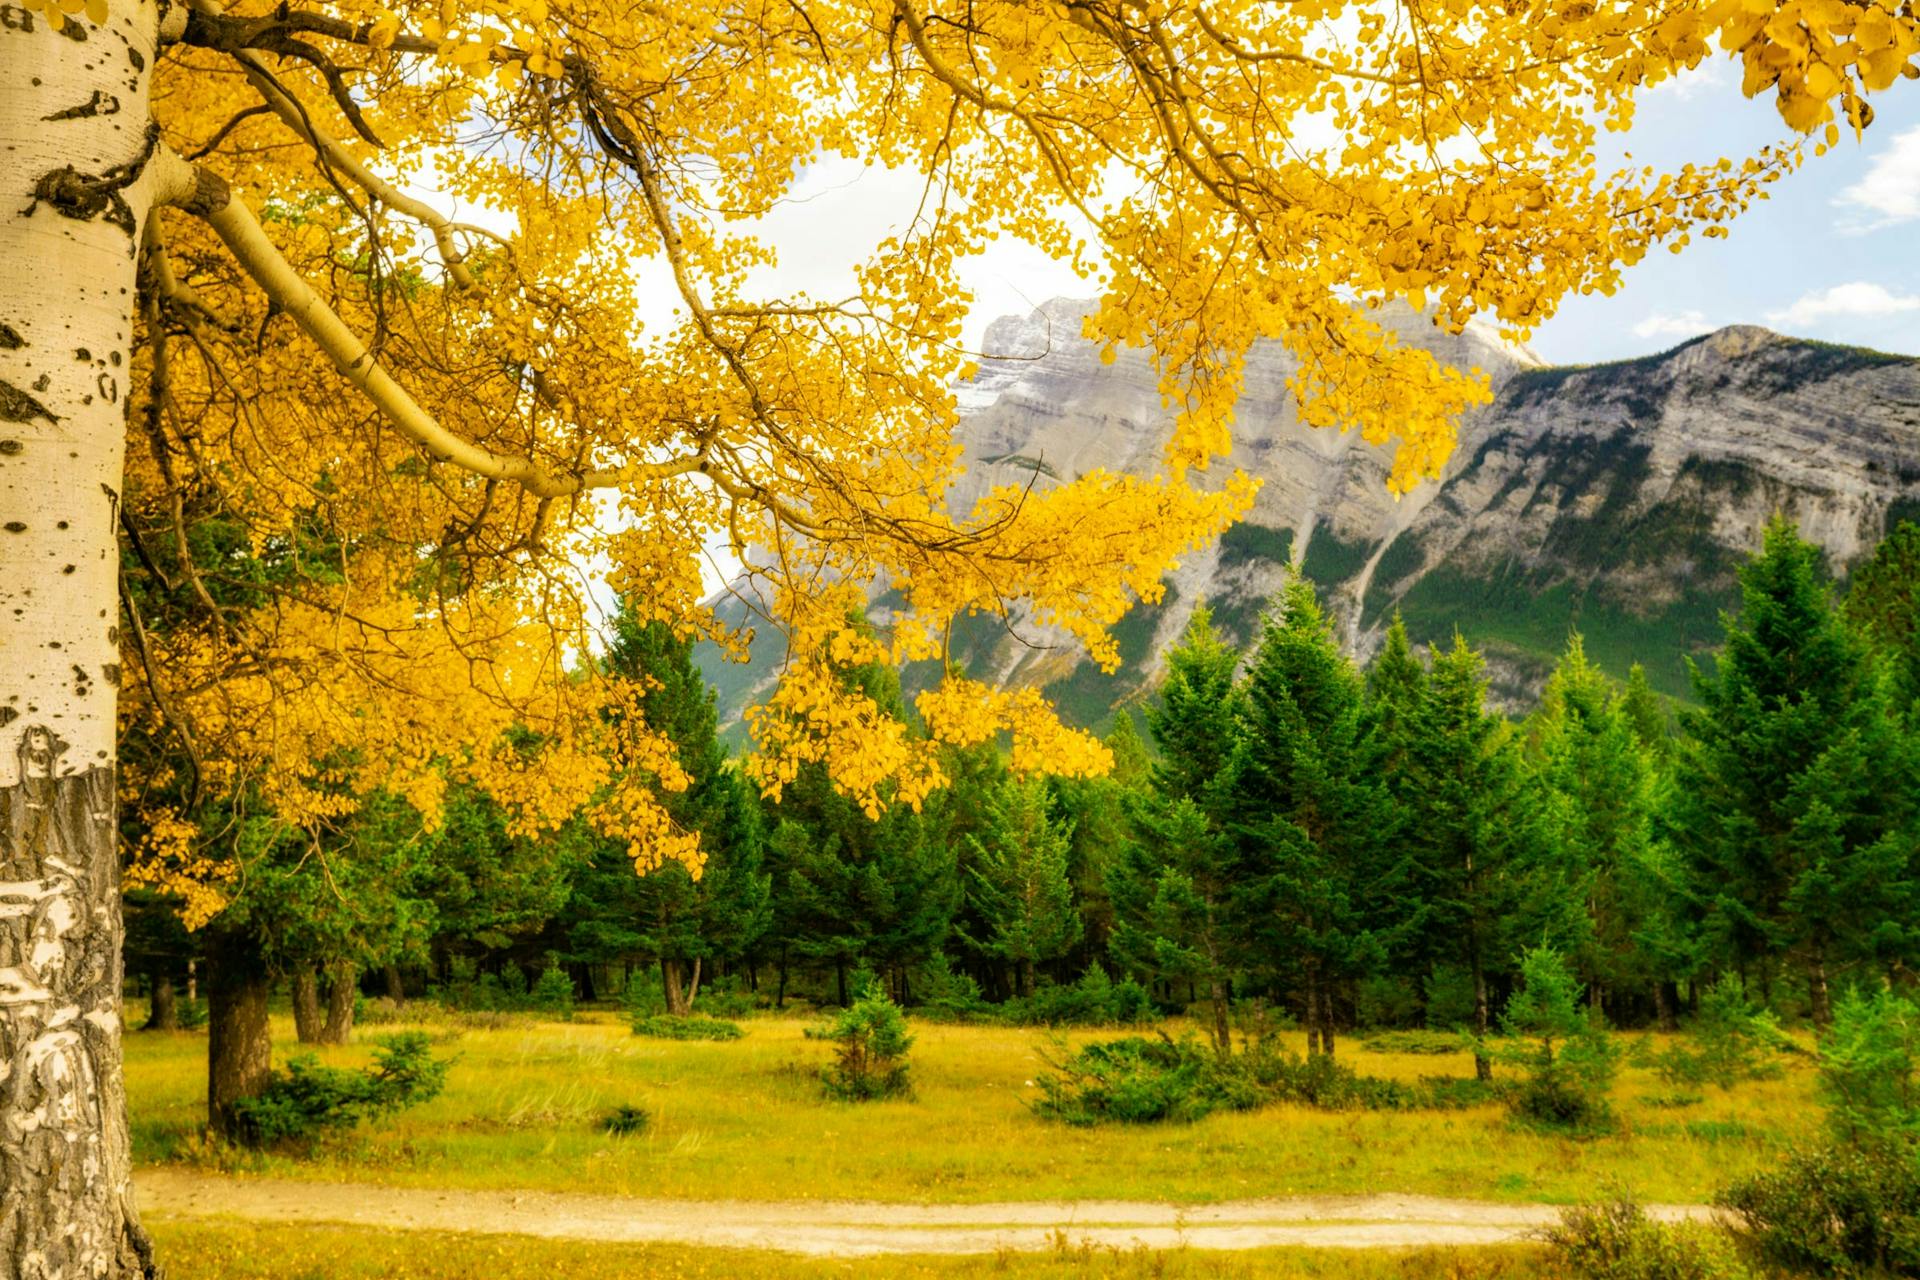 The 10 Best Campgrounds for Colorado Leaf Peeping